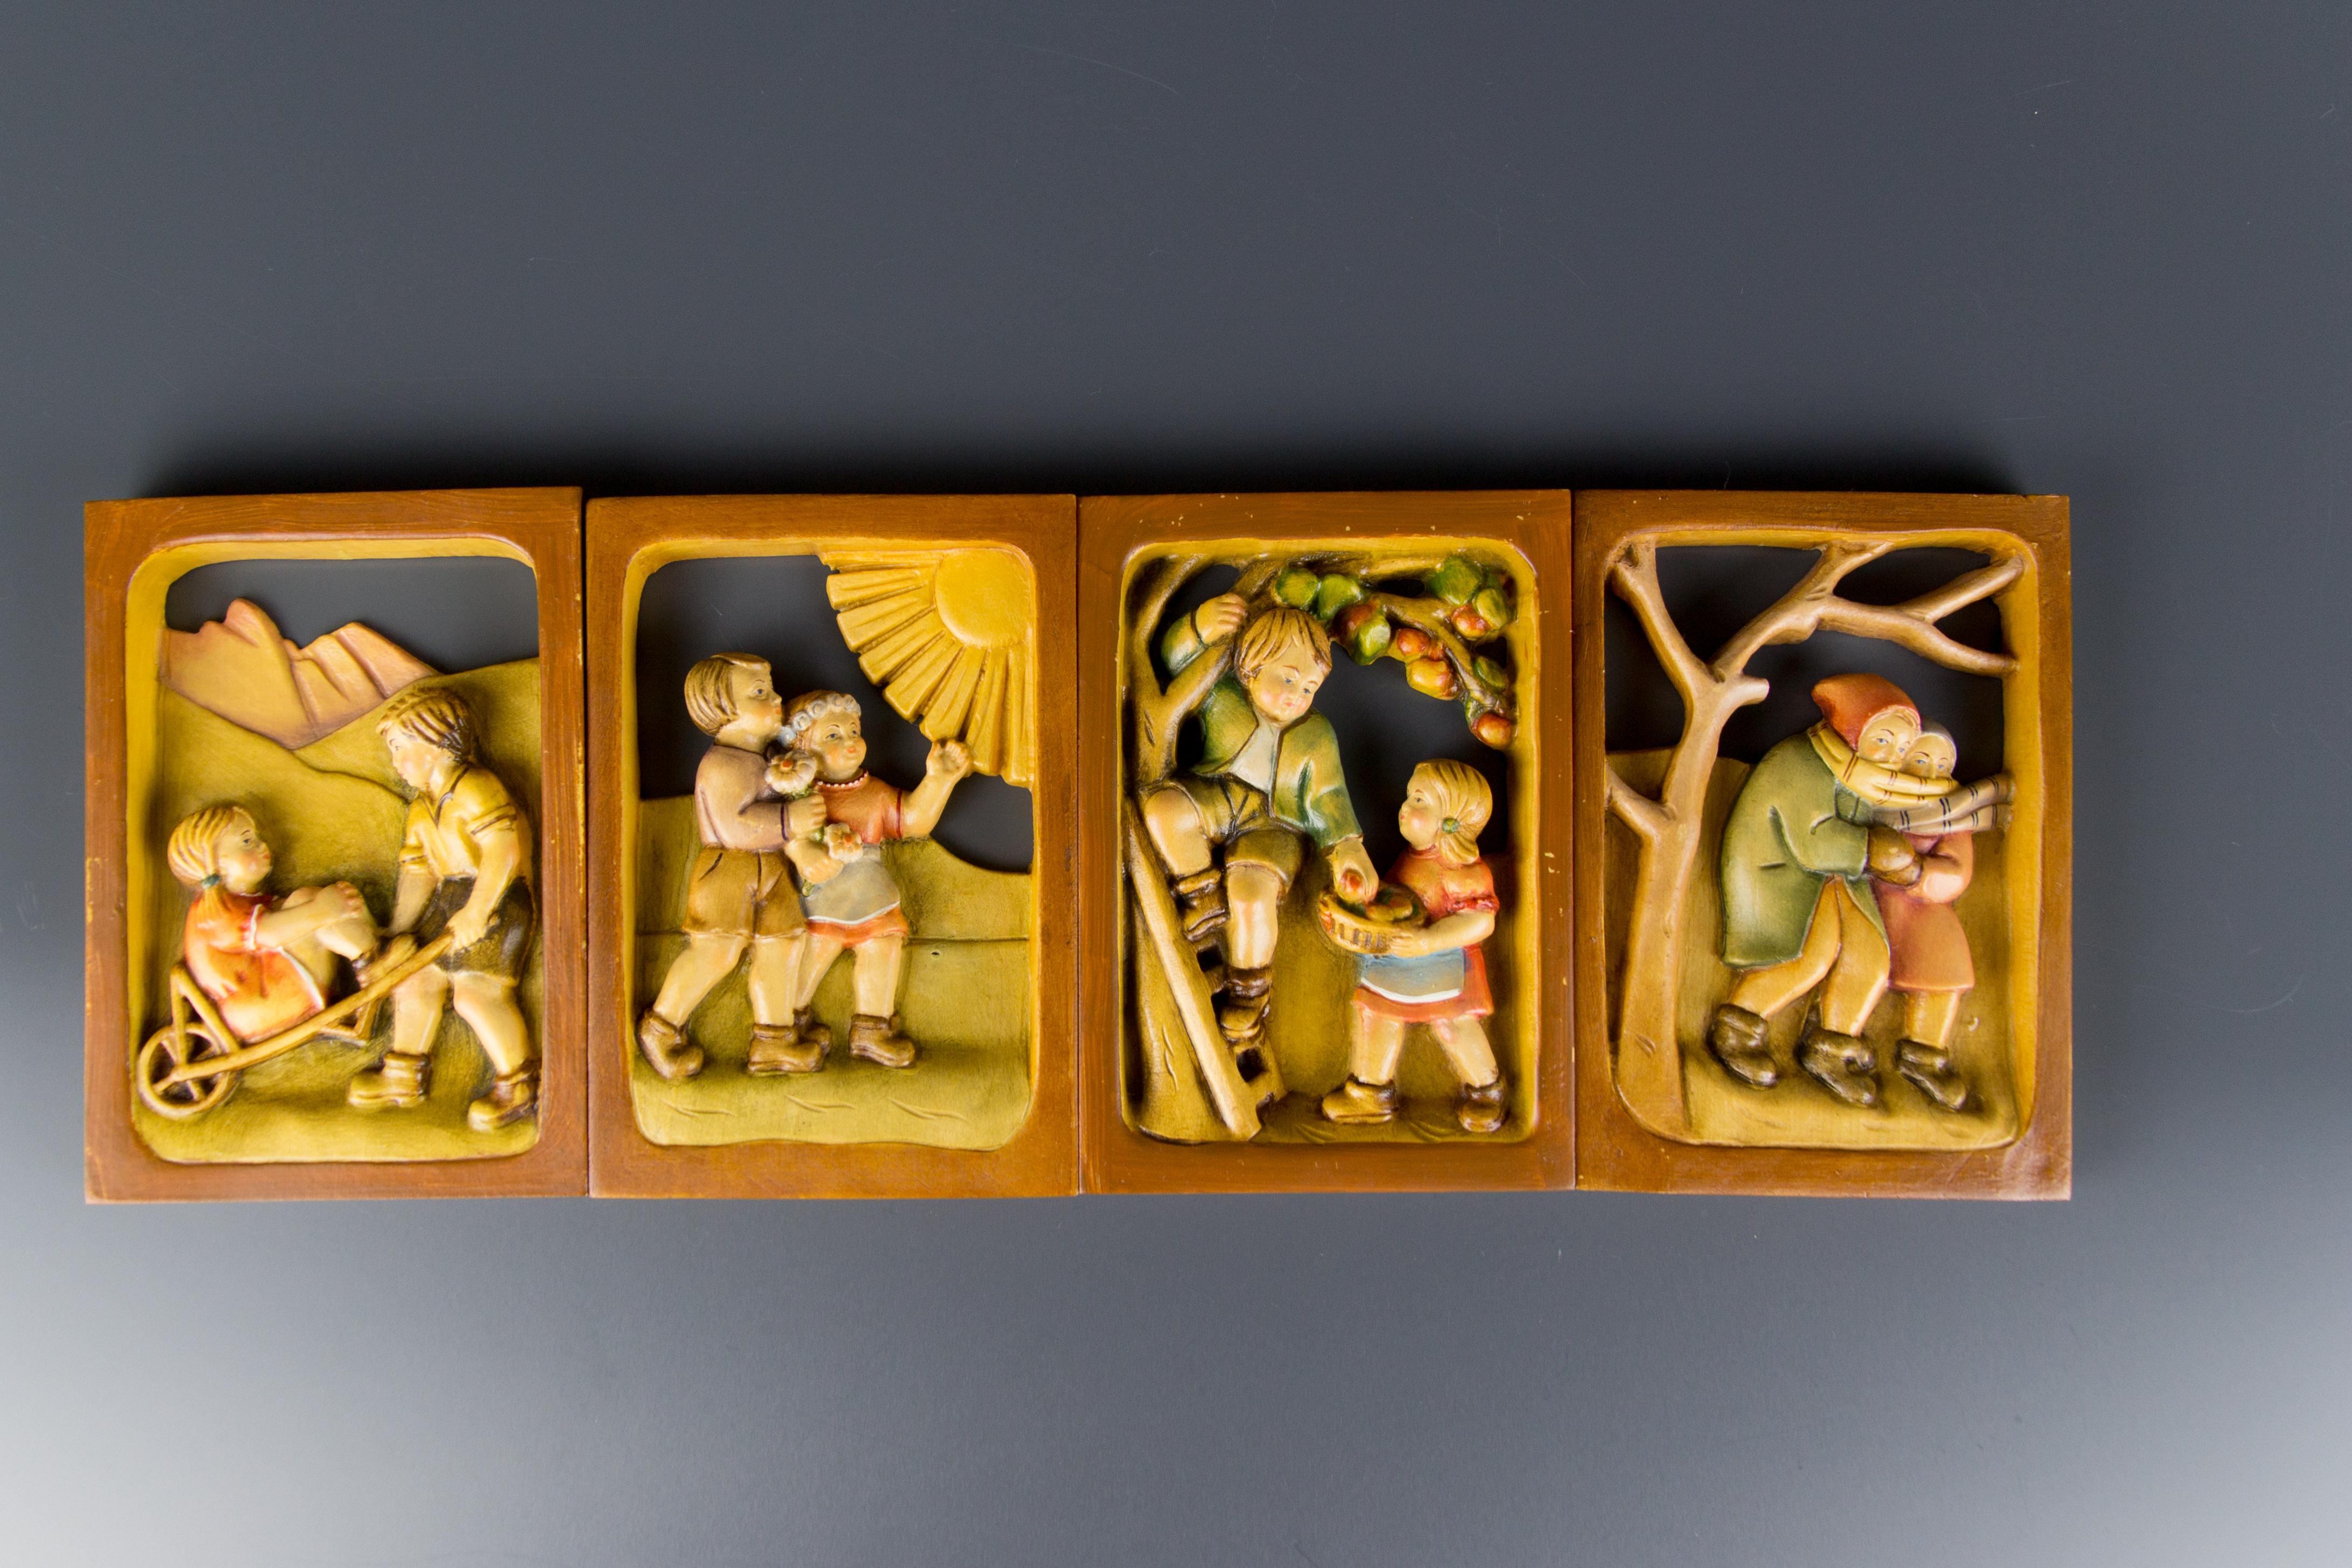 An adorable set of four wooden pictures depicting scenes of cute children in Four Seasons. Masterfully hand carved and hand painted. South-Tyrol, 1980s.
Dimensions (one picture): height 16 cm / 6.29 in; width 11 cm / 4.33 in; depth 1.5 cm / 0.59 in.